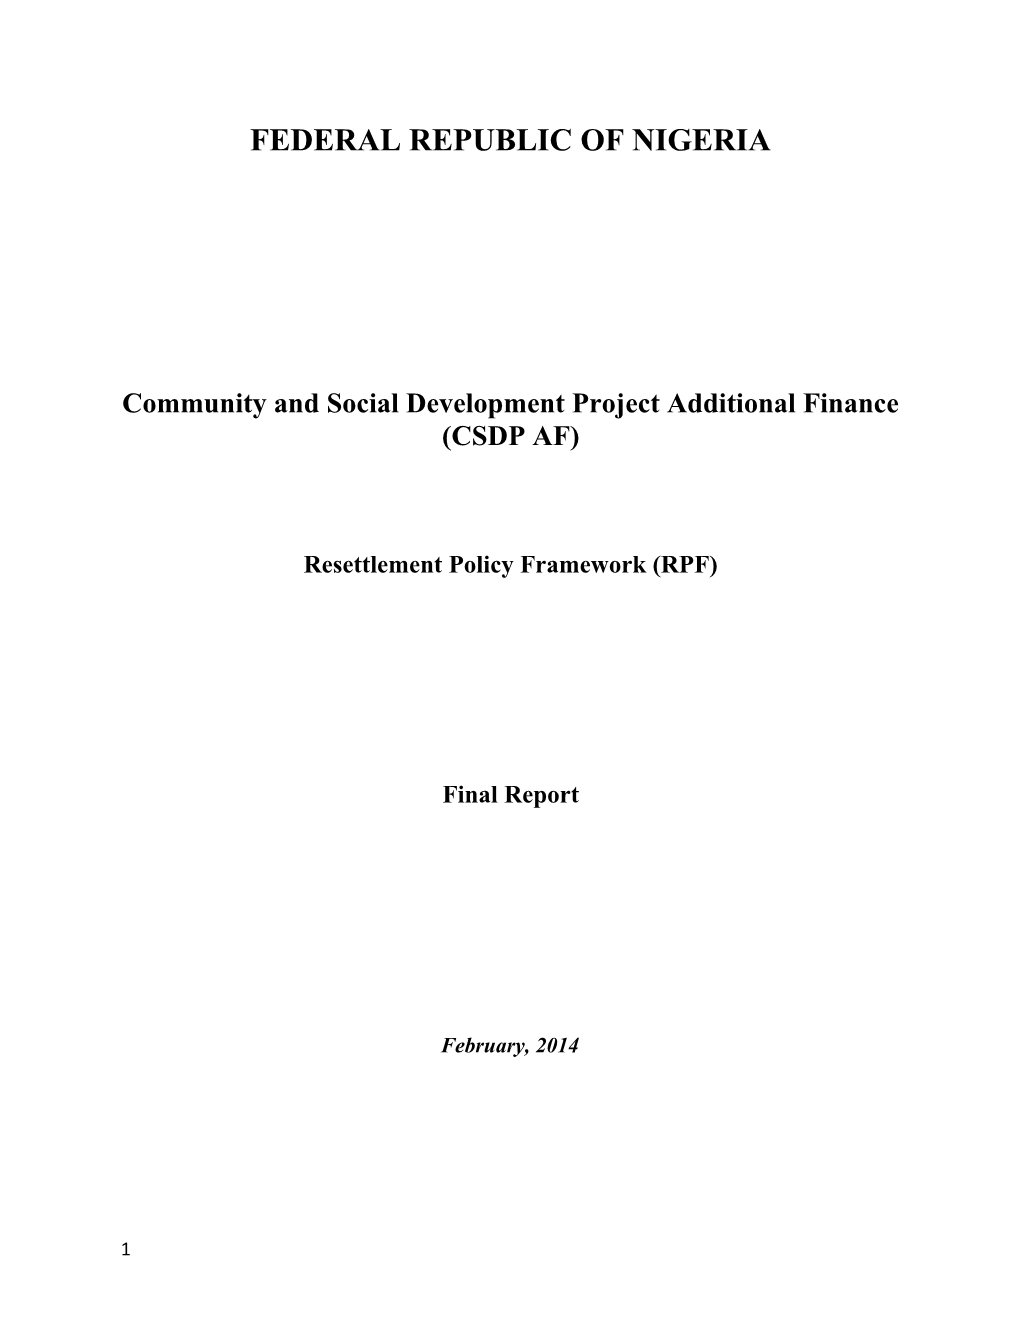 Community and Social Development Projectadditional Finance (CSDP AF)